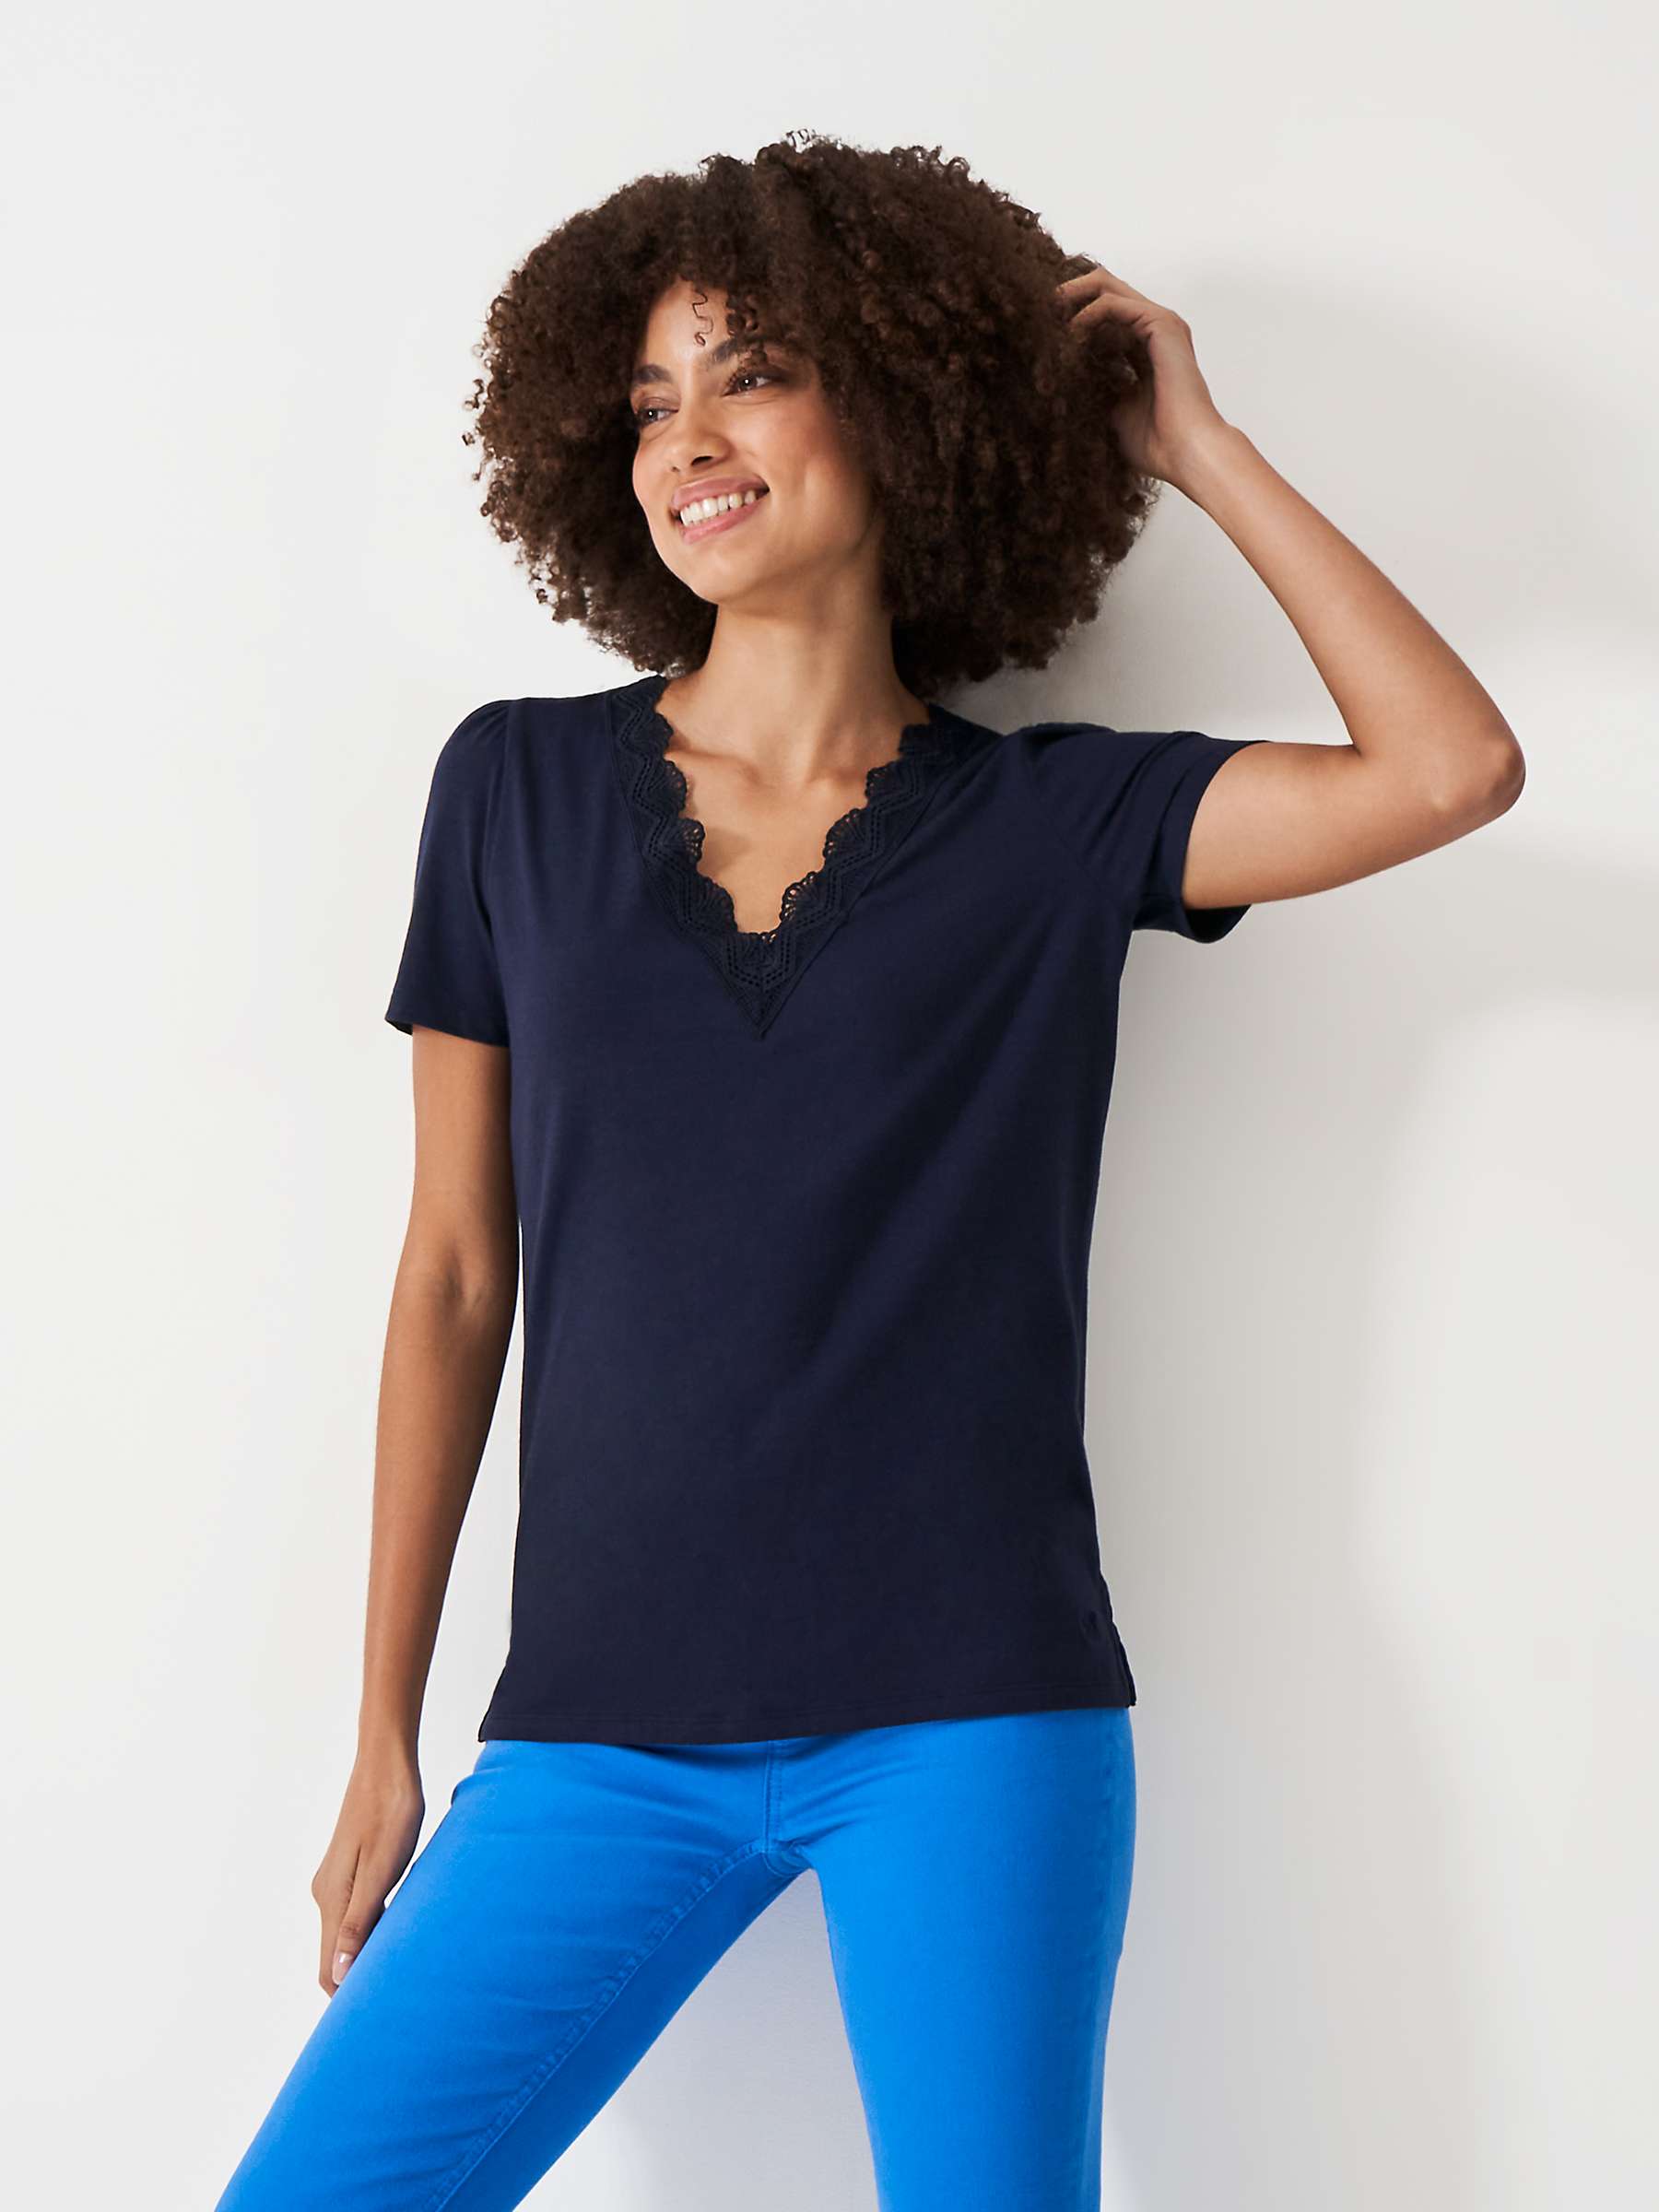 Buy Crew Clothing Lace Neck Short Sleeve T-Shirt, Navy Online at johnlewis.com